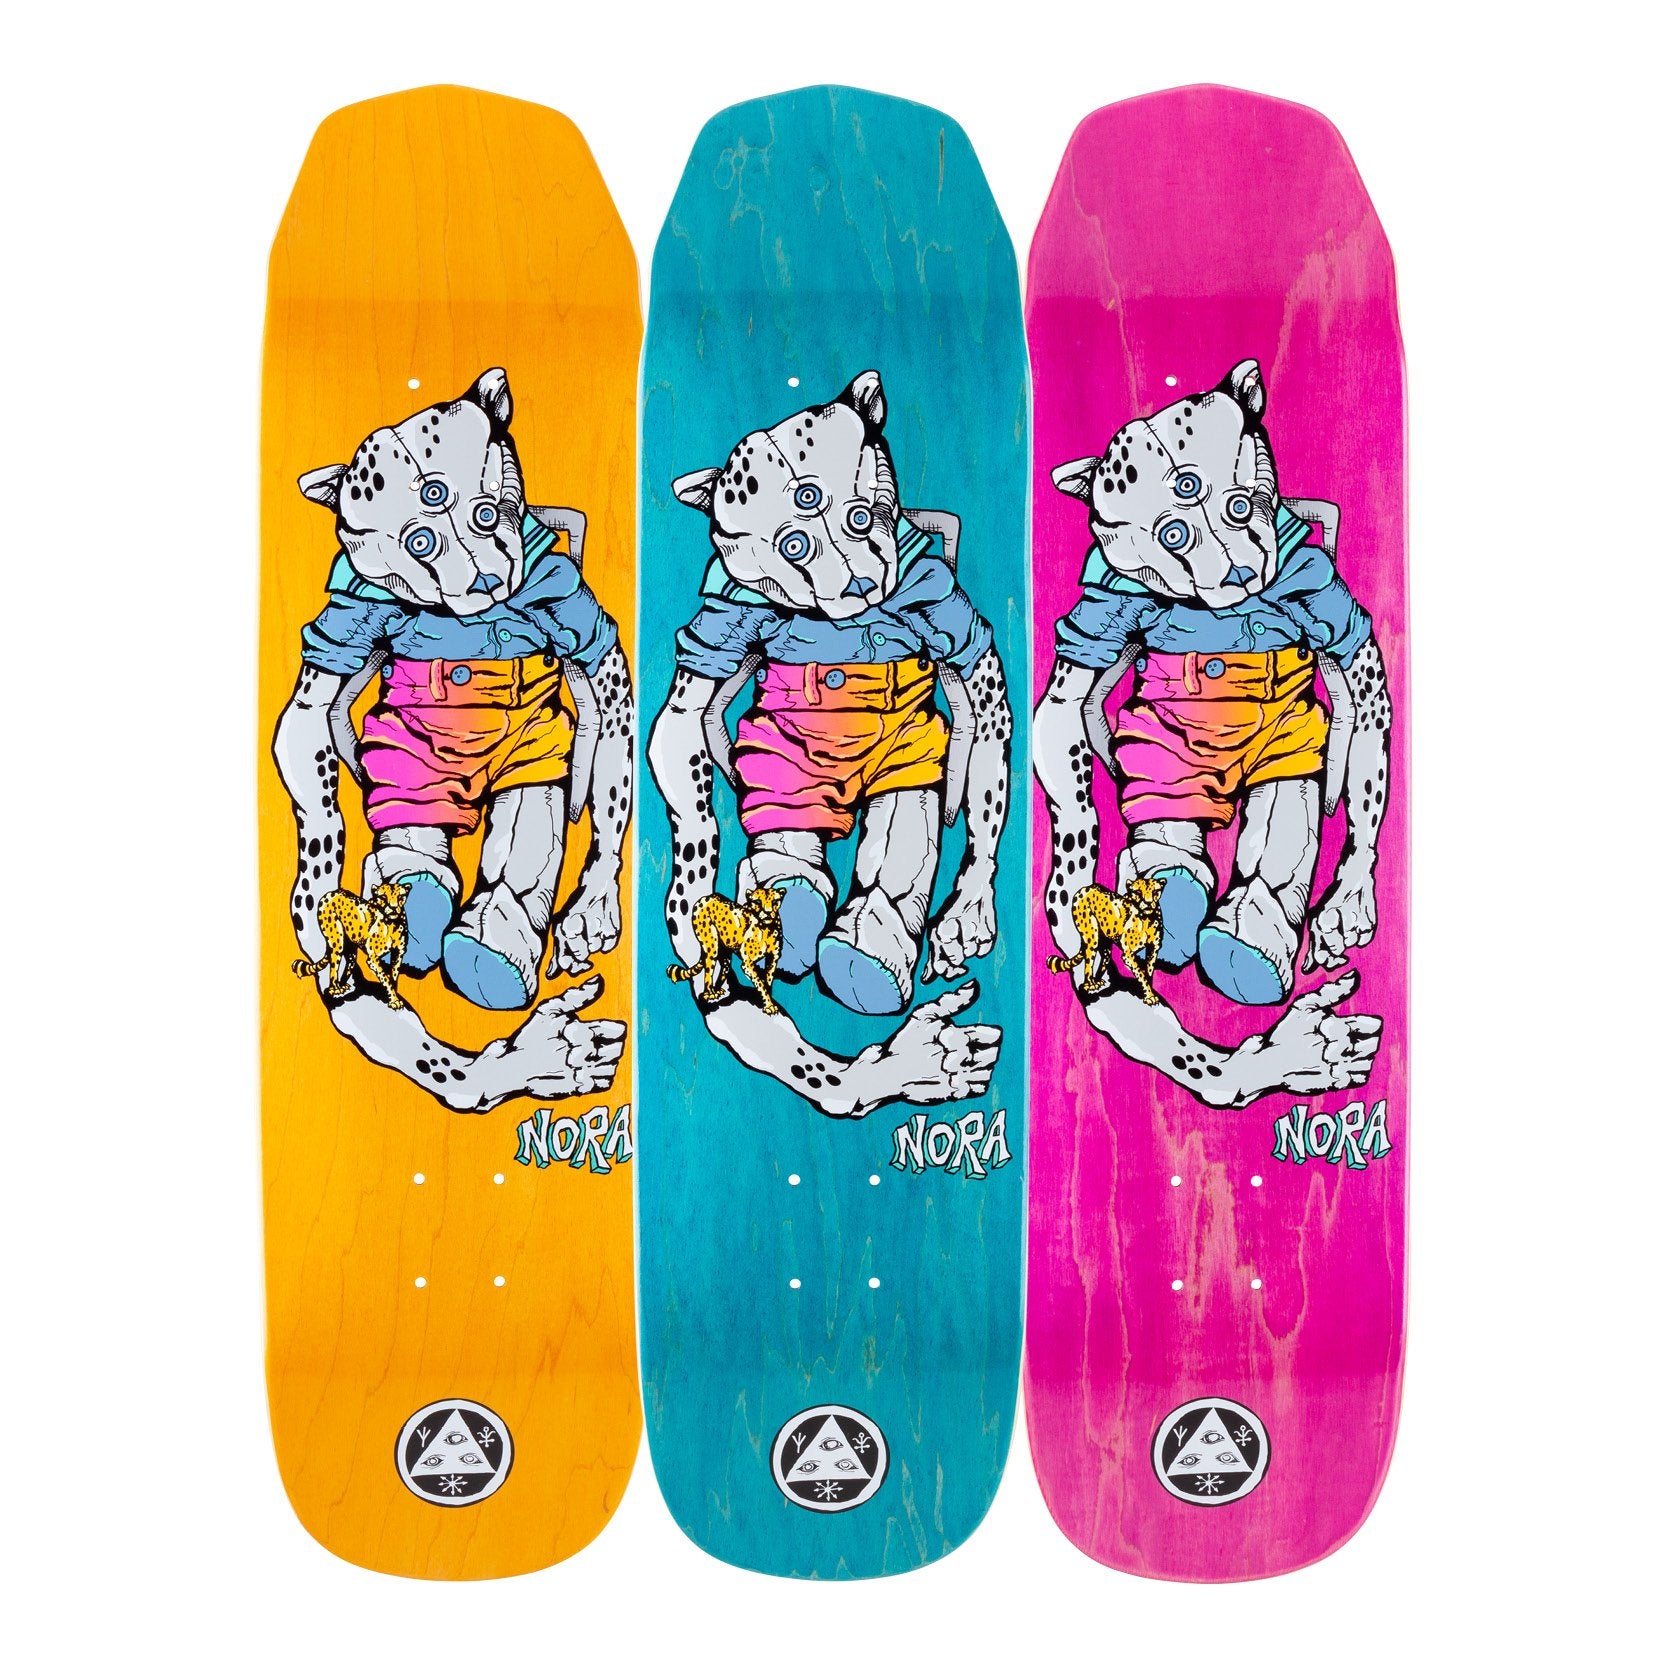 WELCOME DECK - NORA VANCONCELLOS TEDDY ON WICKED PRINCESS (8.125") - The Drive Skateshop